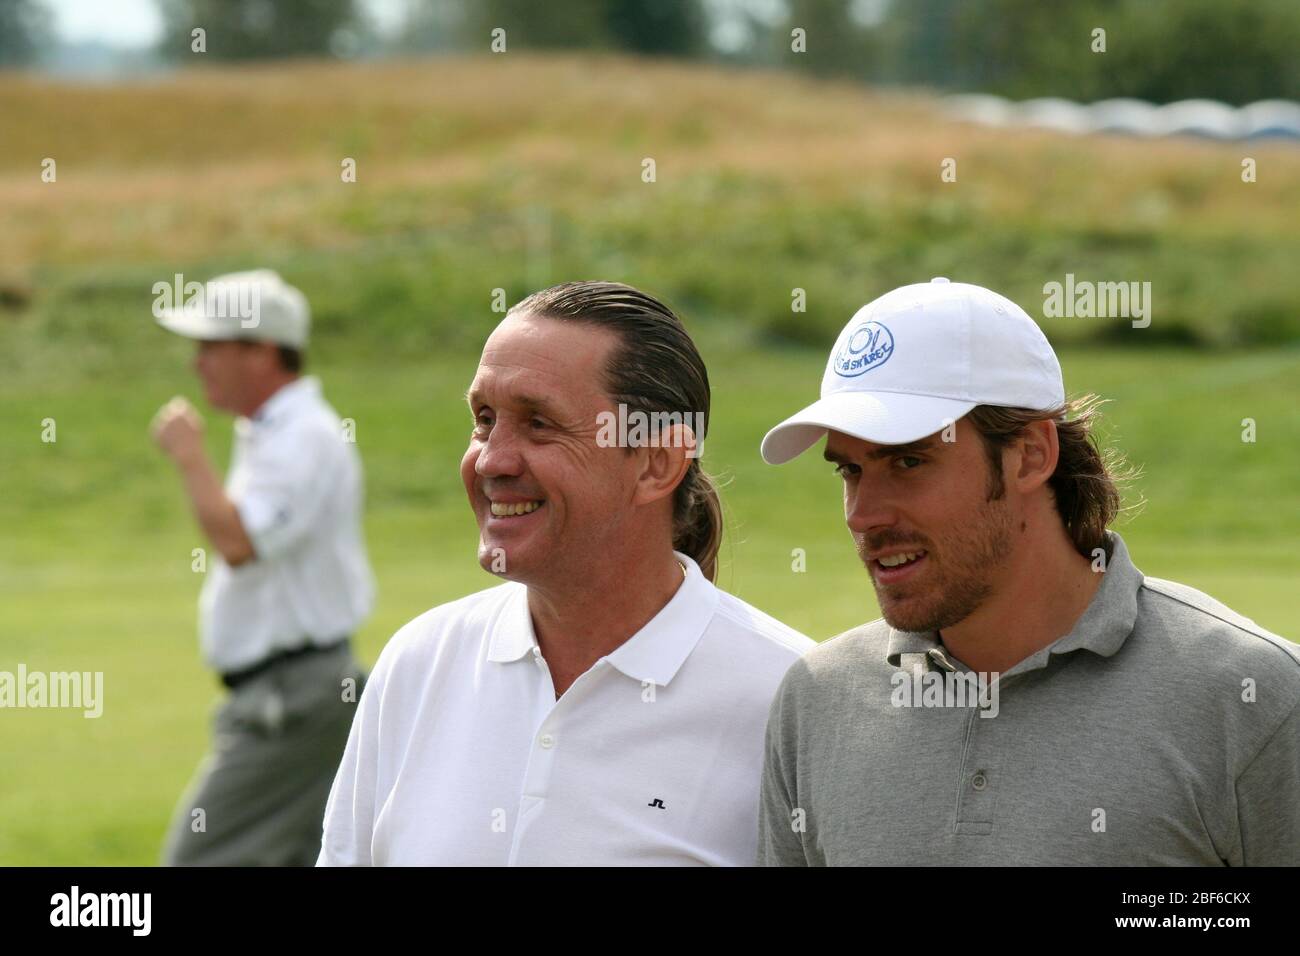 Nico McBrain and hockey player Henrik Zetterberg on the golf course, playing a Pro Am in Stockholm / Sweden, Arlandastad, golf course, august 2007. Stock Photo